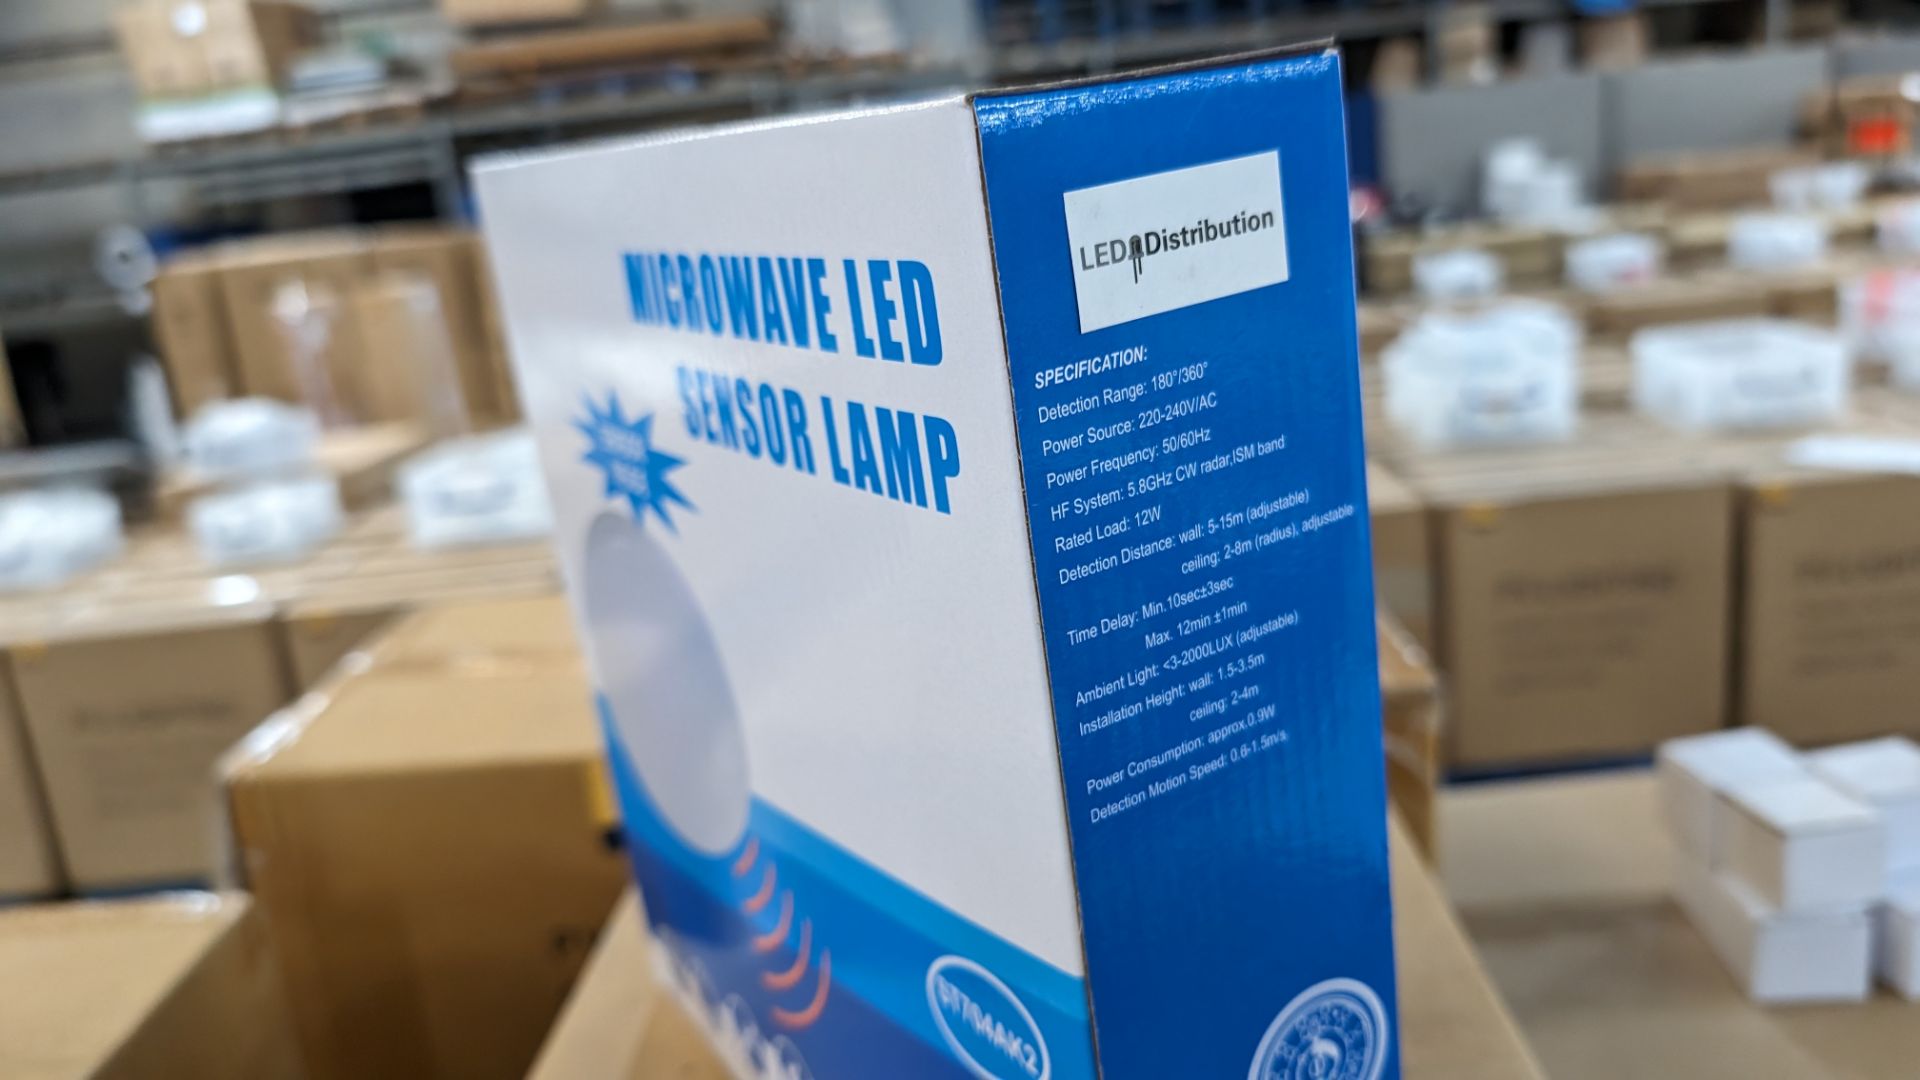 32 off microwave LED sensor lamps. IP44. 12w rated load (one stack) - Image 4 of 5